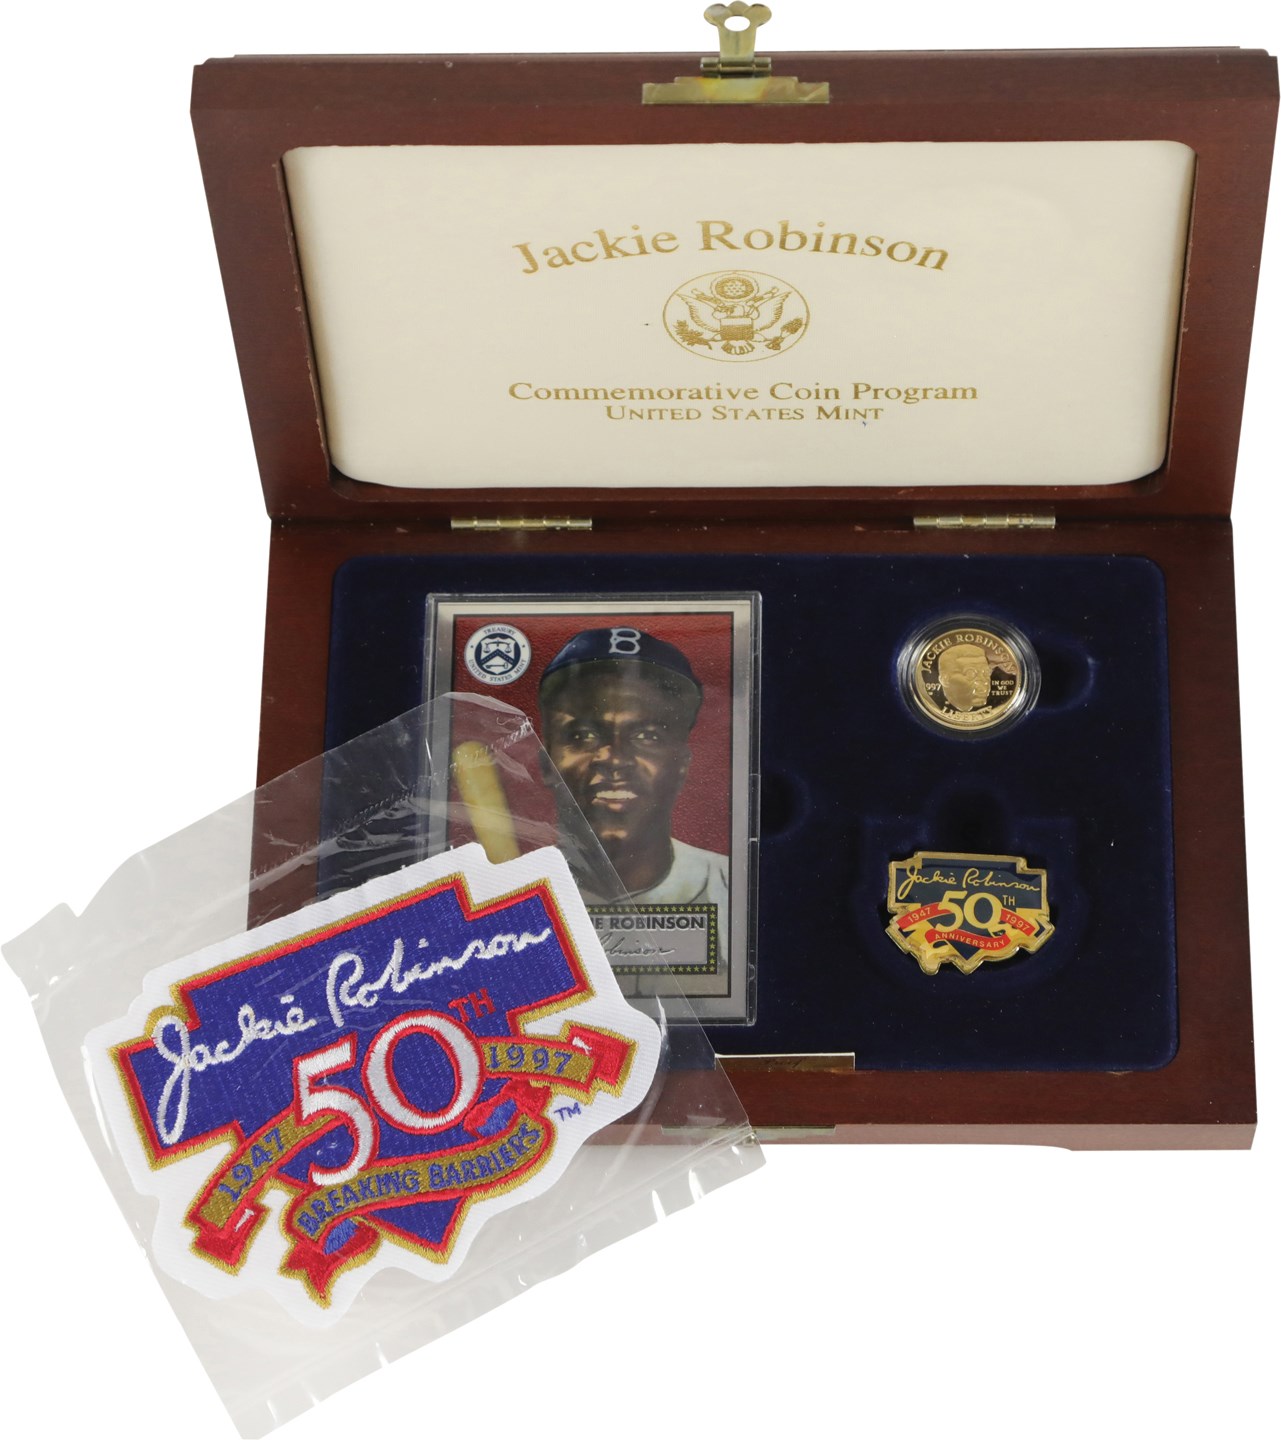 - 1997 Jackie Robinson 50th Anniversary Gold Coin (1/4 Ounce)